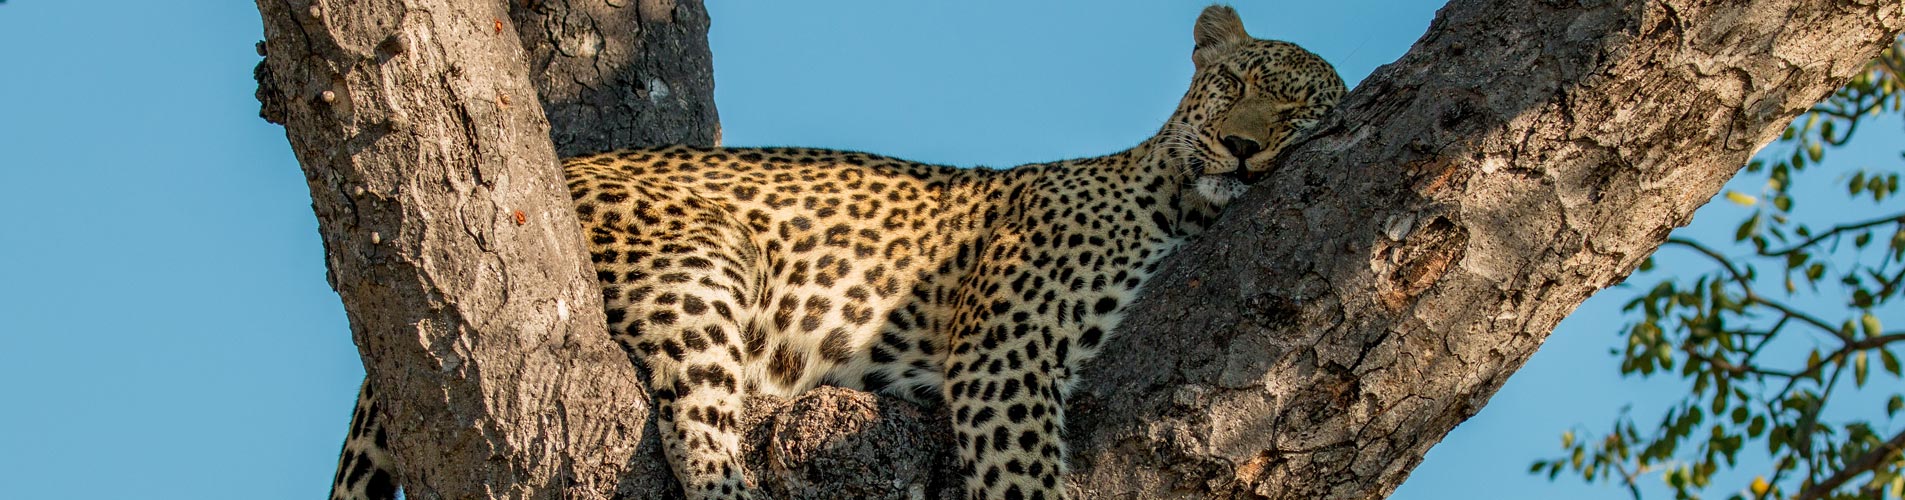 Lazy Leopard in South Africa